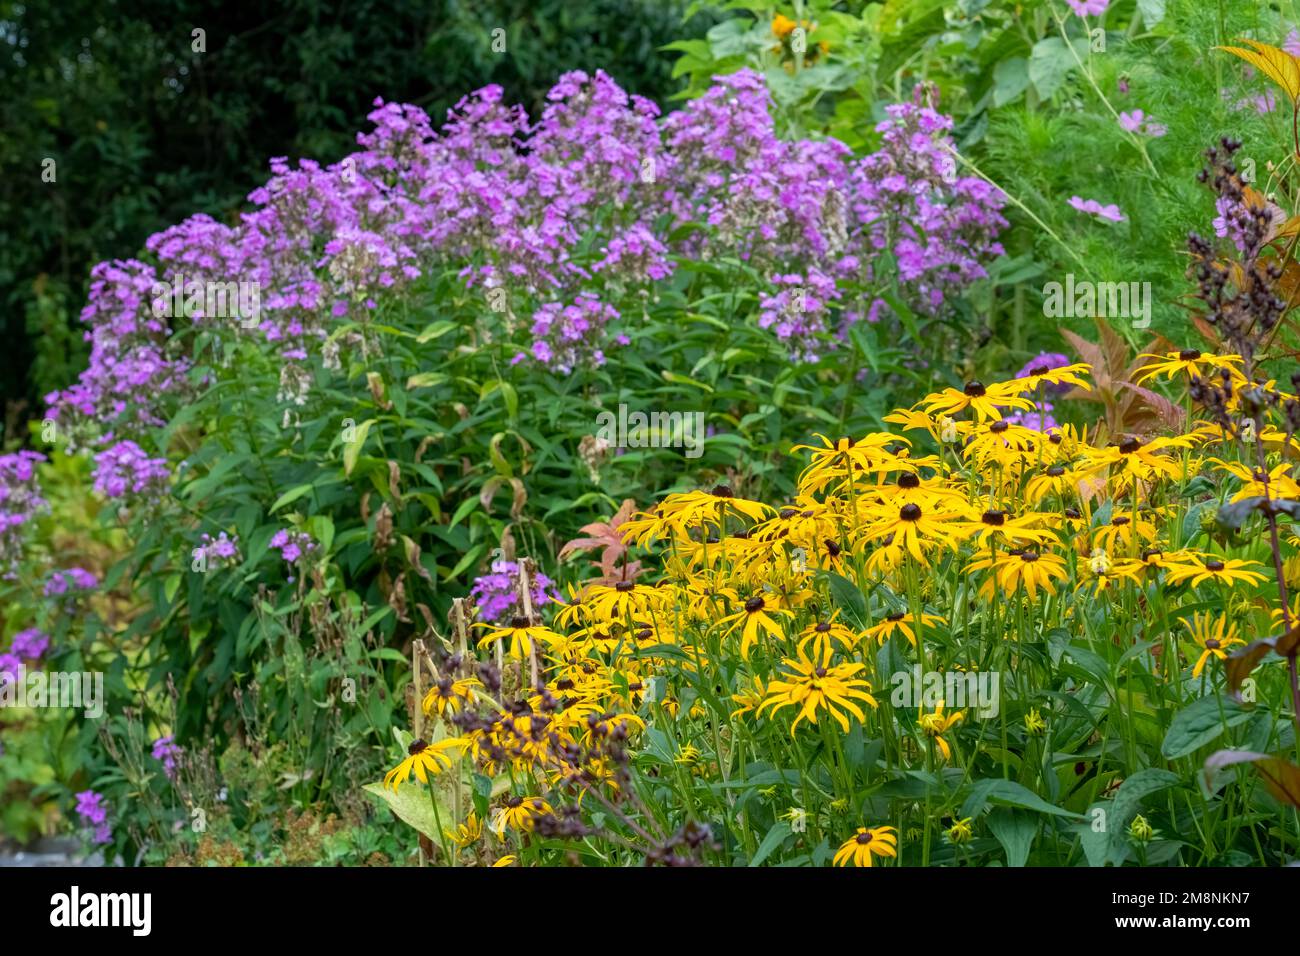 Bellevue, Washington, USA.   Goldstrum Black-eyed Susan flowers in the foreground and phlox in the background. Stock Photo